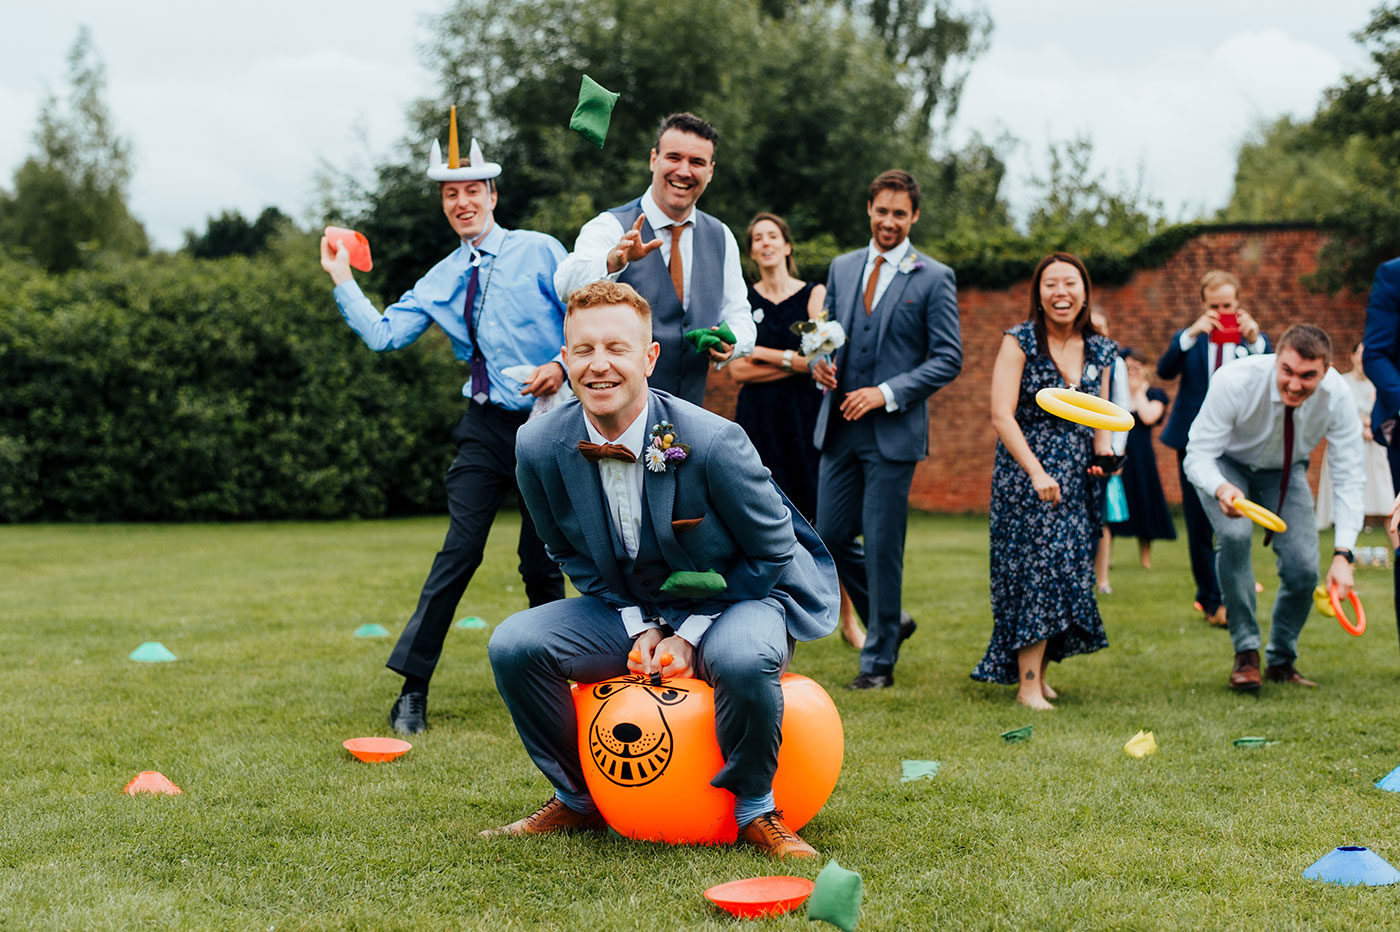 Wedding Reception Games & Activities Your Guests Will Love